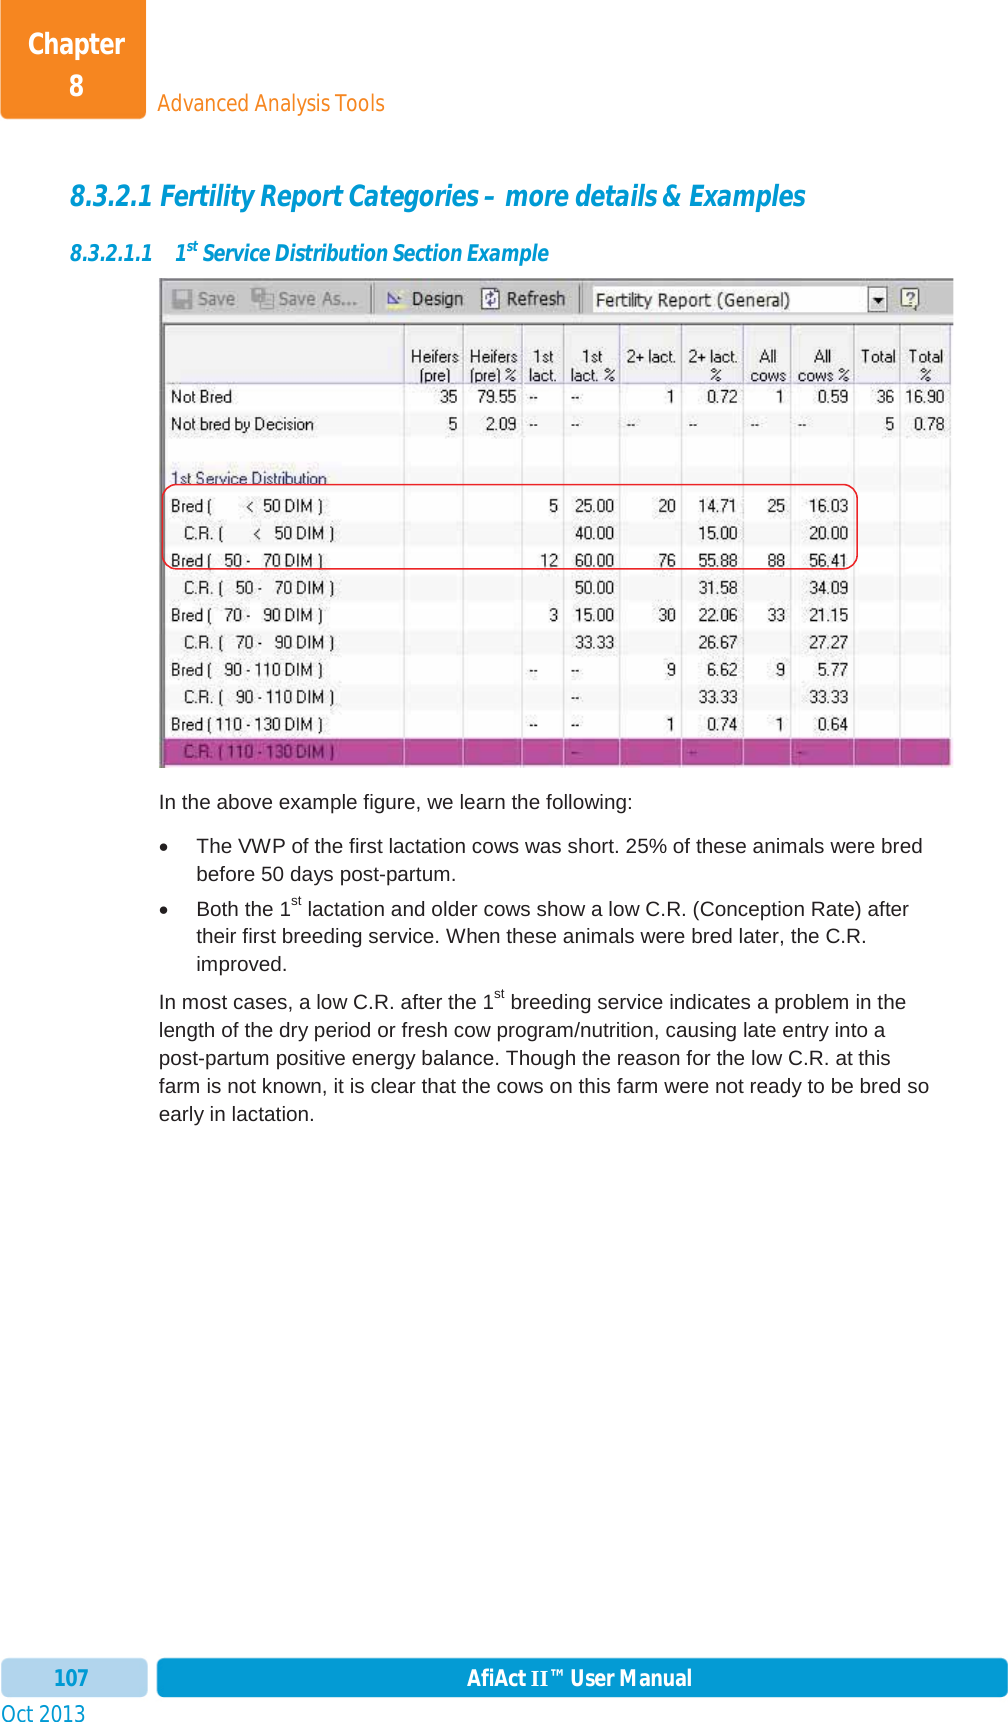 Oct 2013 AfiAct II™ User Manual107Advanced Analysis ToolsChapter 88.3.2.1 Fertility Report Categories – more details &amp; Examples 8.3.2.1.1 1st Service Distribution Section Example In the above example figure, we learn the following: x  The VWP of the first lactation cows was short. 25% of these animals were bred before 50 days post-partum. x  Both the 1st lactation and older cows show a low C.R. (Conception Rate) after their first breeding service. When these animals were bred later, the C.R. improved.  In most cases, a low C.R. after the 1st breeding service indicates a problem in the length of the dry period or fresh cow program/nutrition, causing late entry into a post-partum positive energy balance. Though the reason for the low C.R. at this farm is not known, it is clear that the cows on this farm were not ready to be bred so early in lactation.  